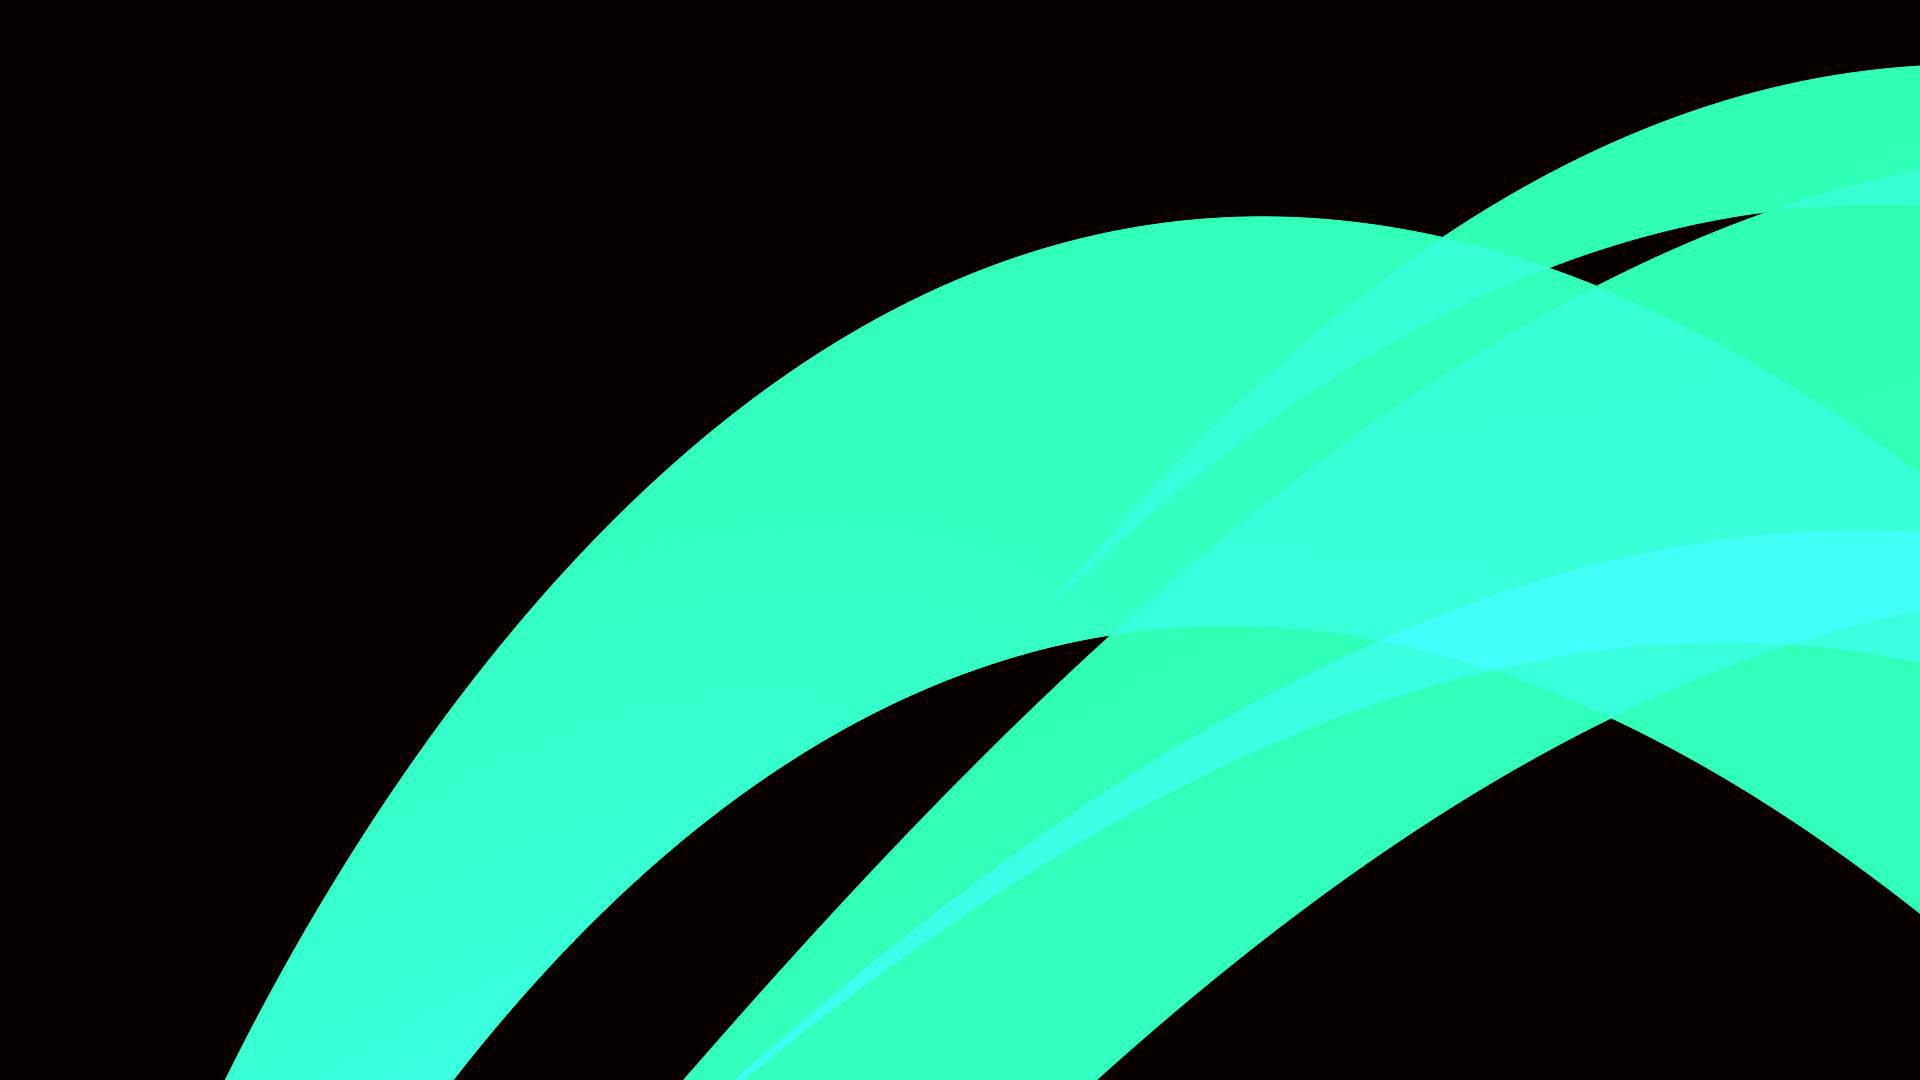 abstract, curve, gradient, green, shapes